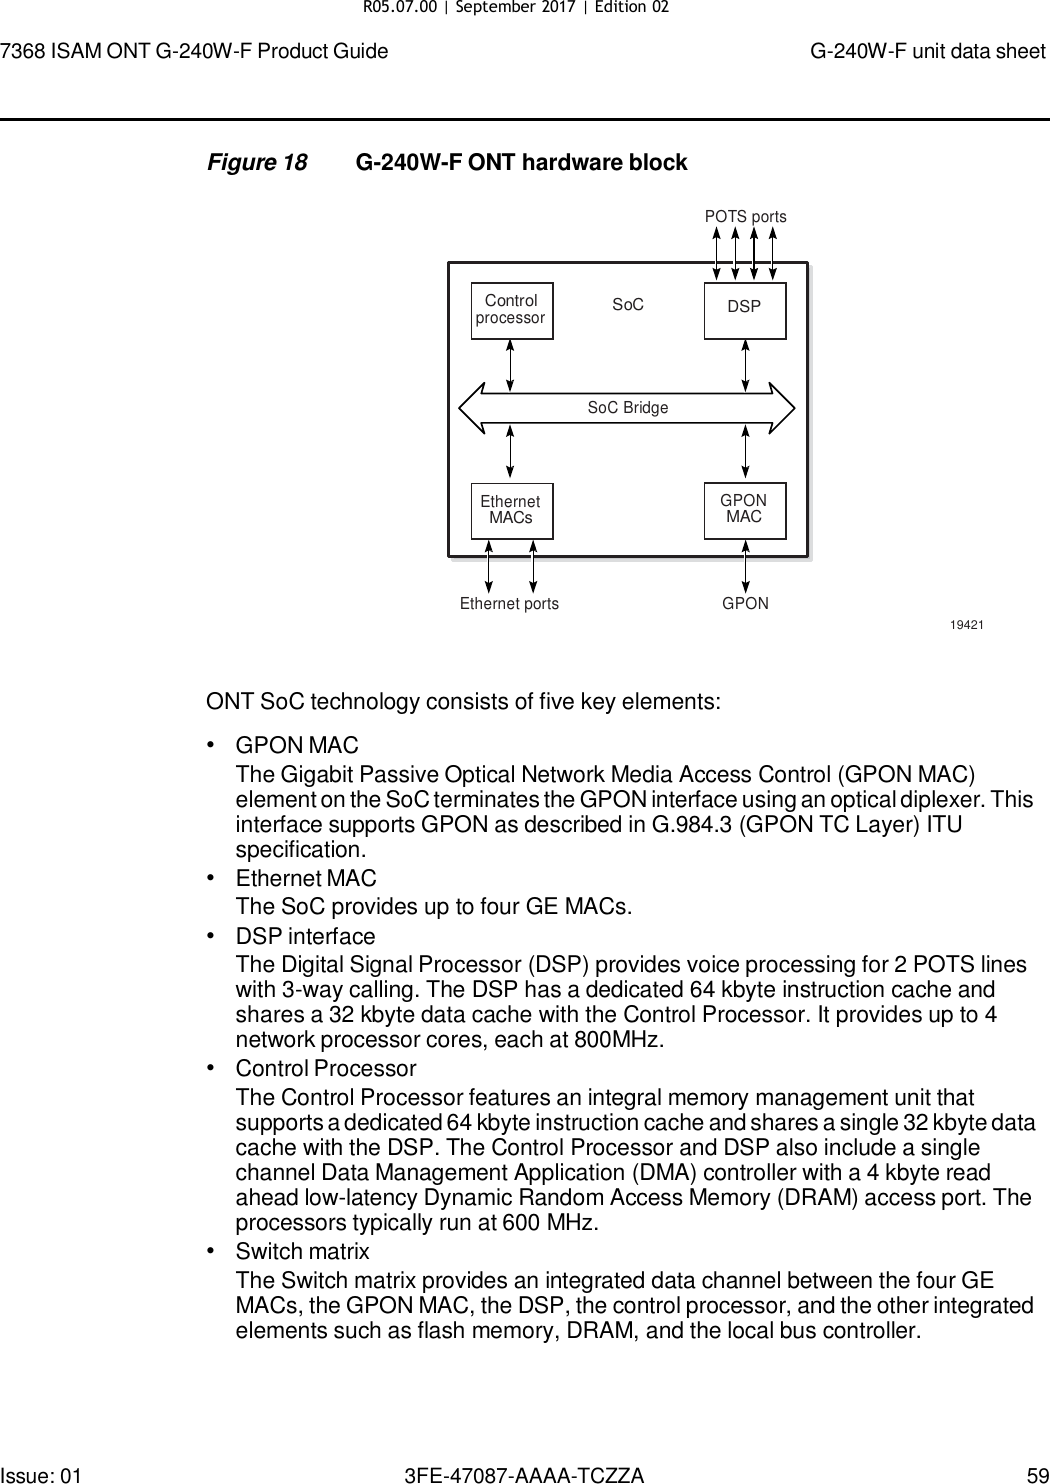 Page 56 of Nokia Bell G240WFV2 7368 ISAM GPON ONU User Manual 7368 ISAM ONT G 240W F Product Guide